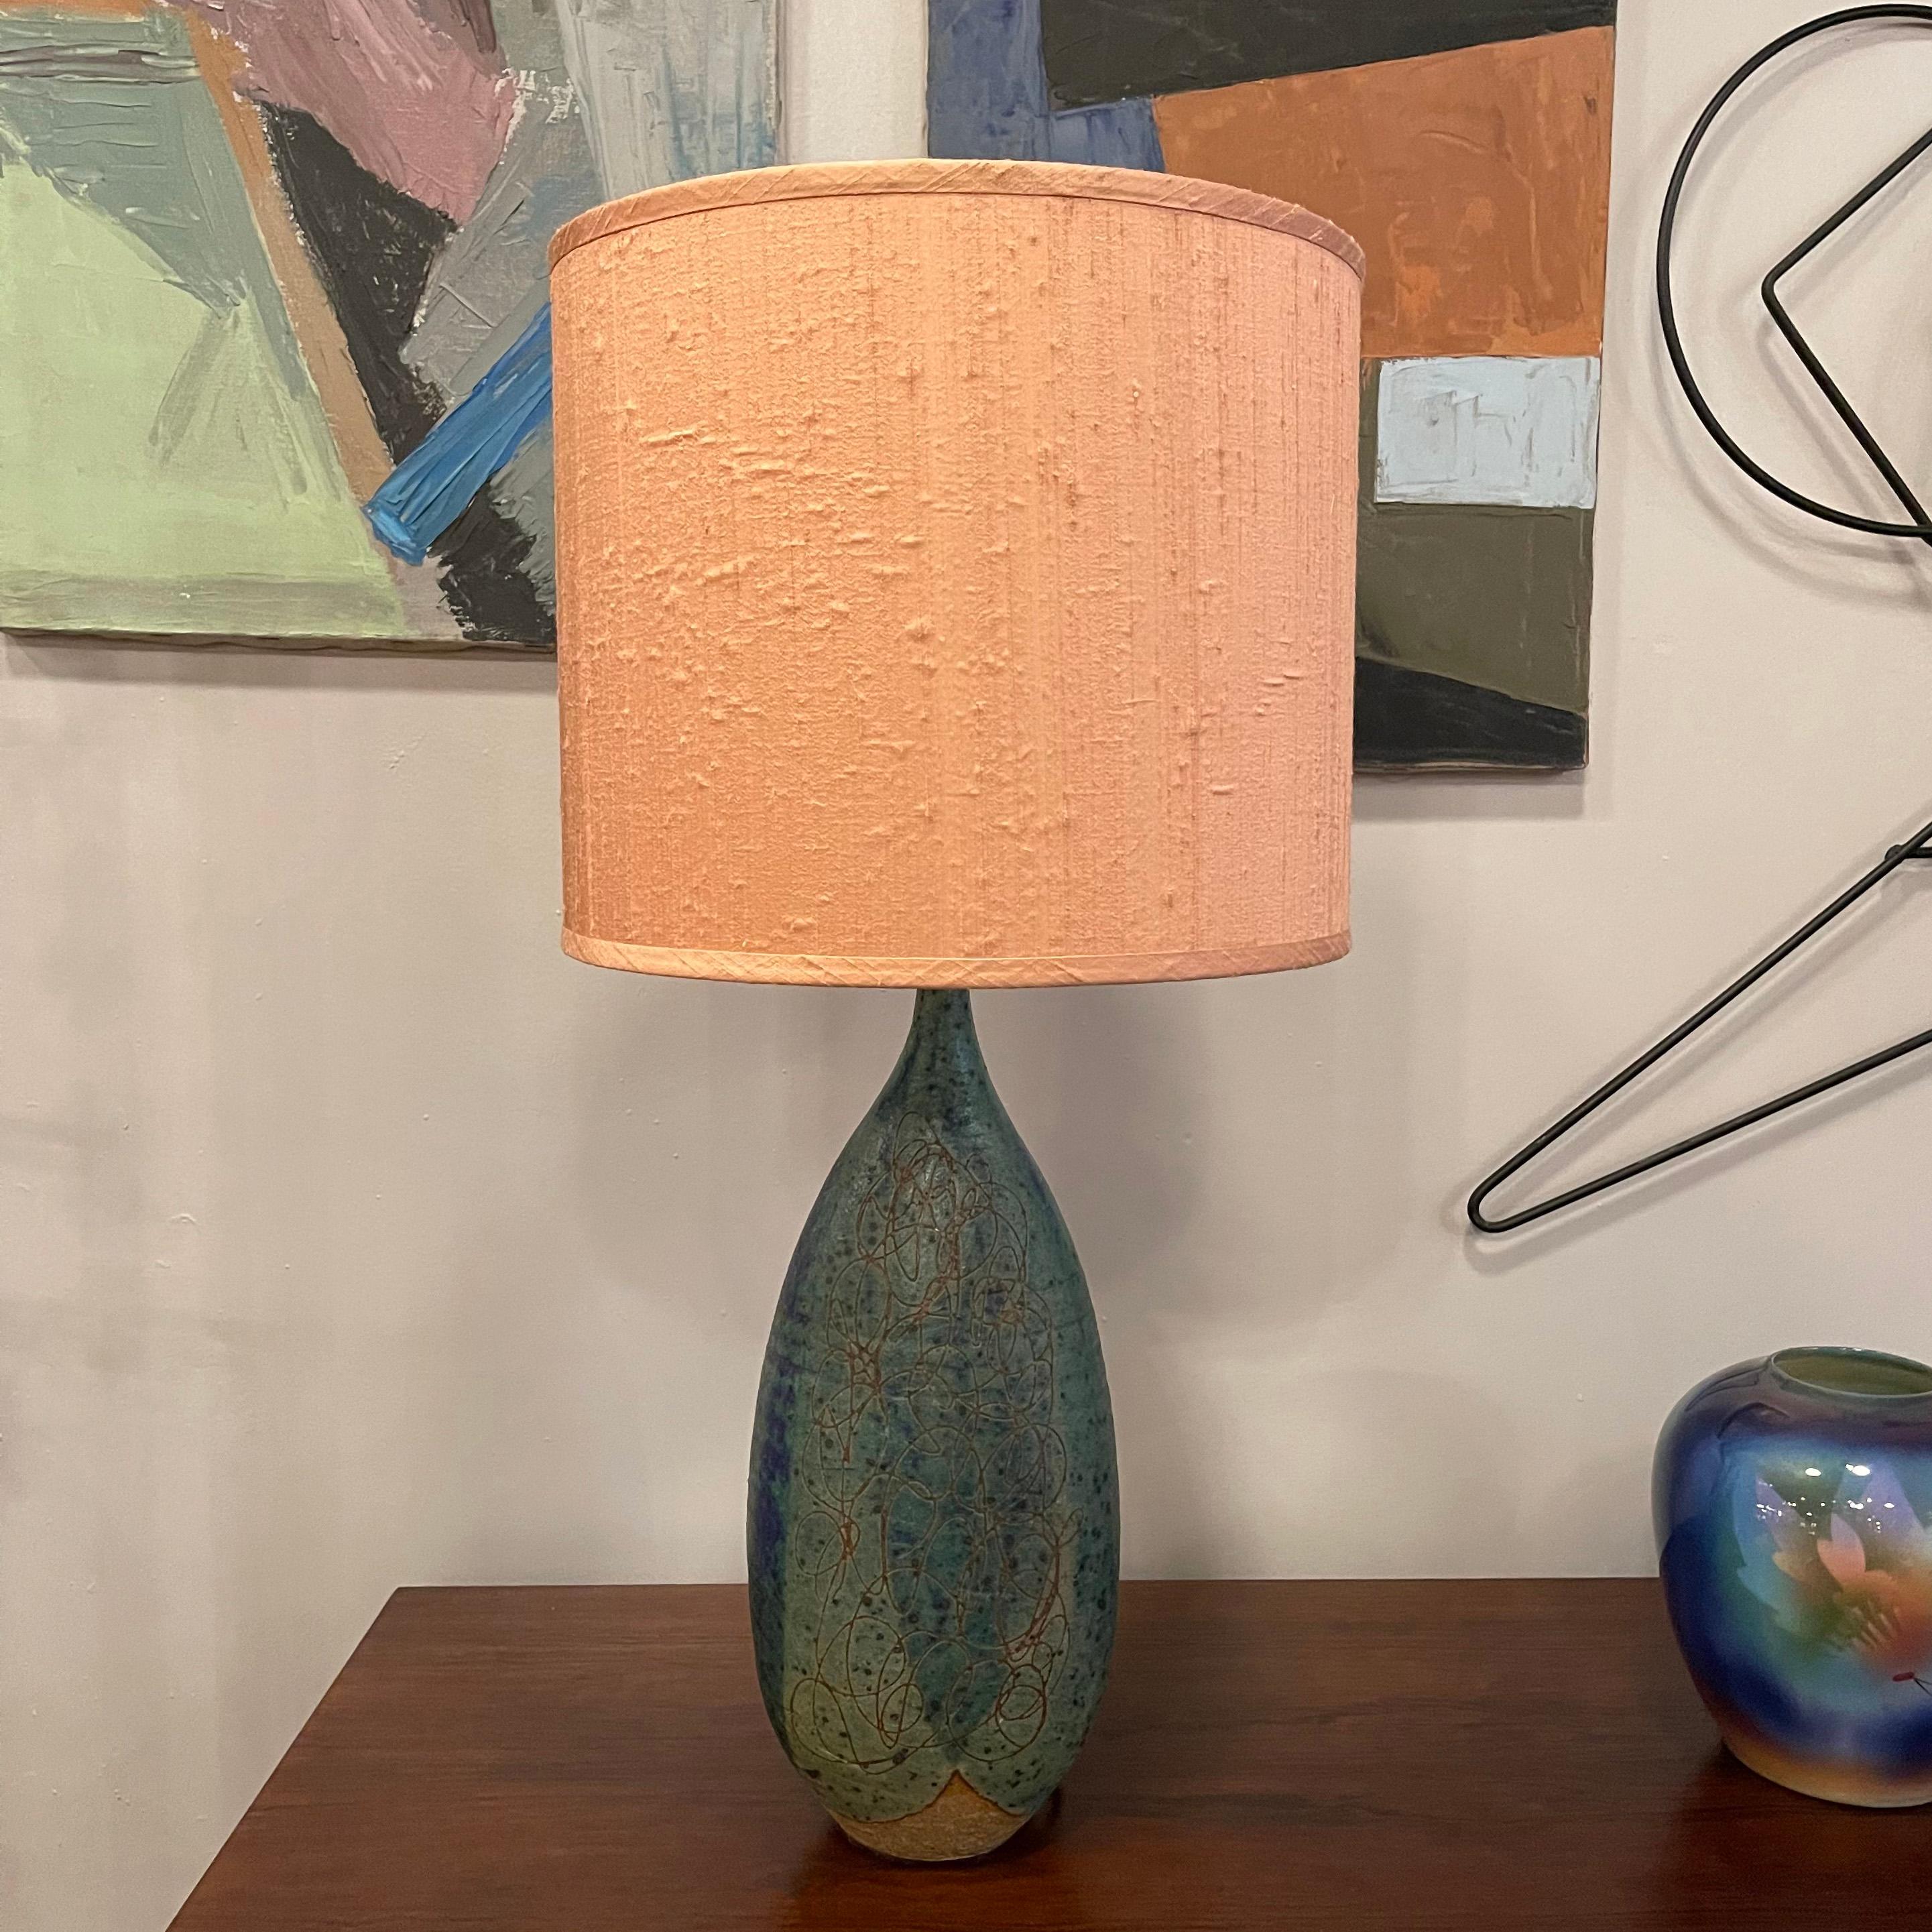 Stunning, Italian, Mid-Century Modern, art pottery table lamp features a 15 inch ht, gourd-shaped base in muted blue and green tones with incised pattern over top. The blush pink raw silk shade 12 inch diameter x 10 inch ht is included.

 